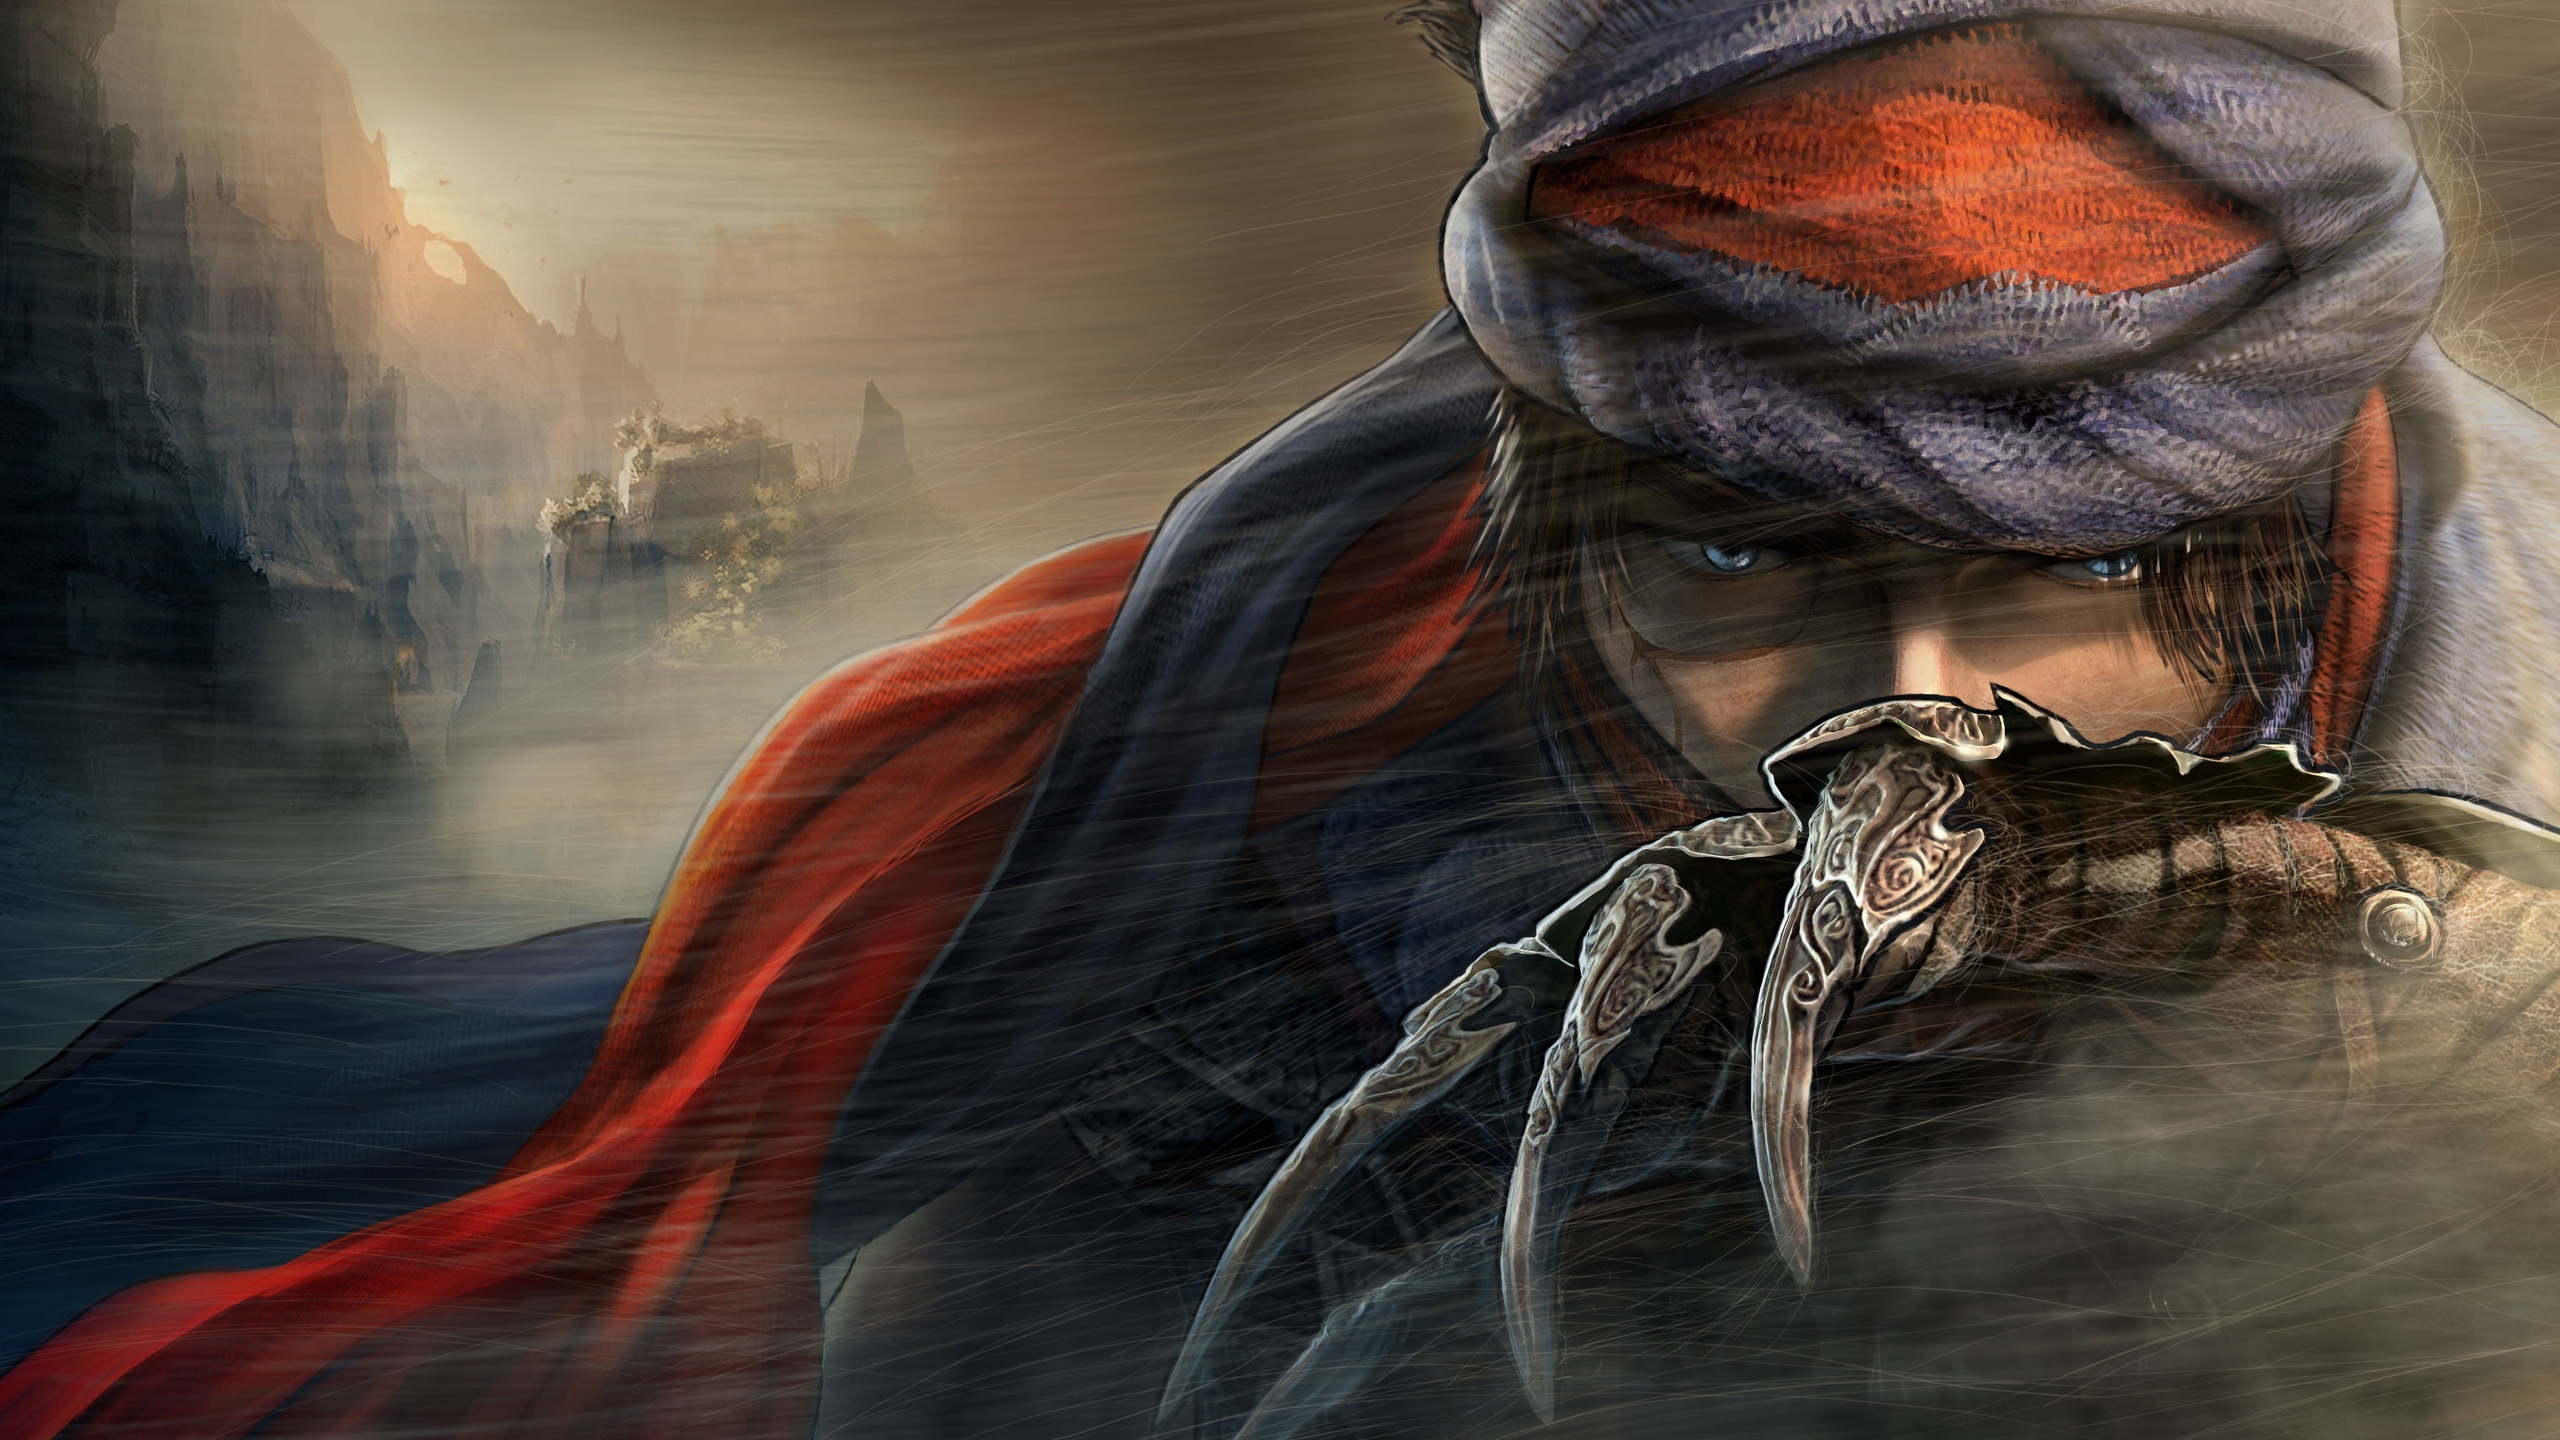 Prince of Persia Face for 2560x1440 HDTV resolution